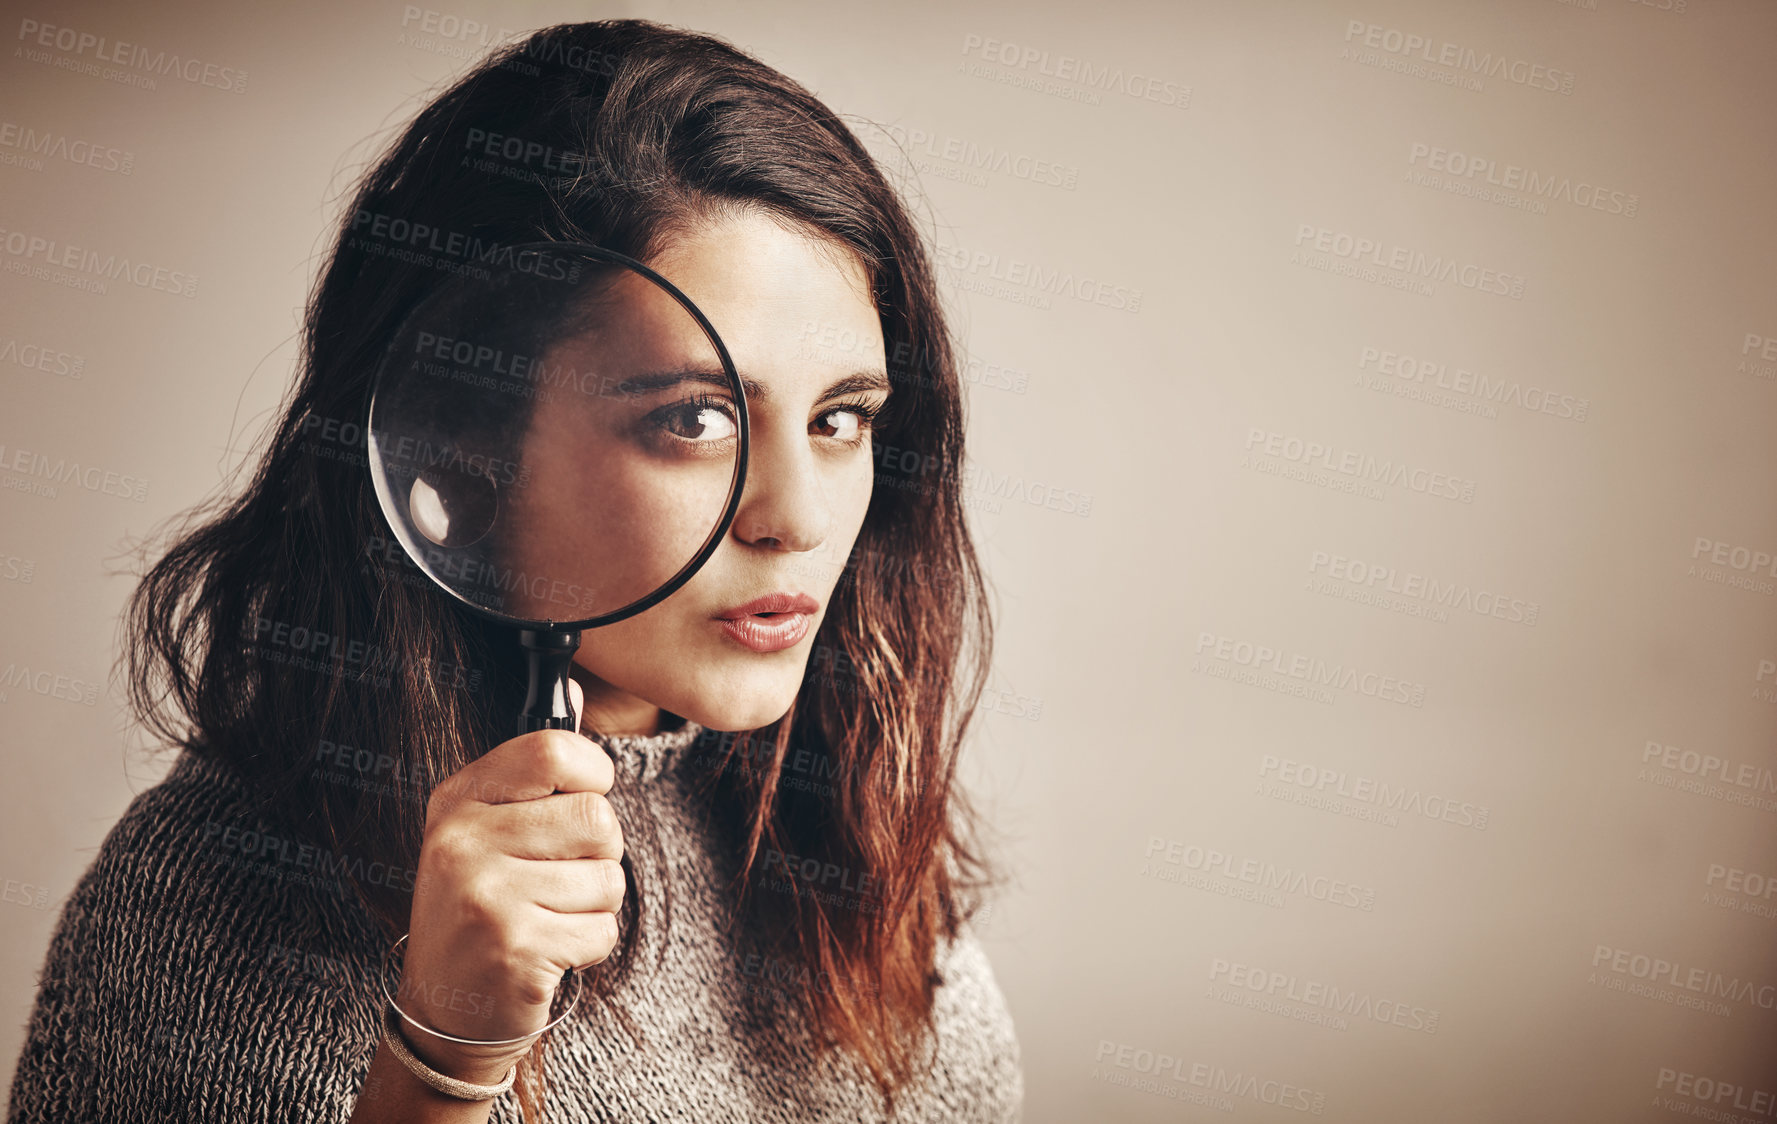 Buy stock photo Studio portrait of a young woman looking through a magnifying glass against a brown background